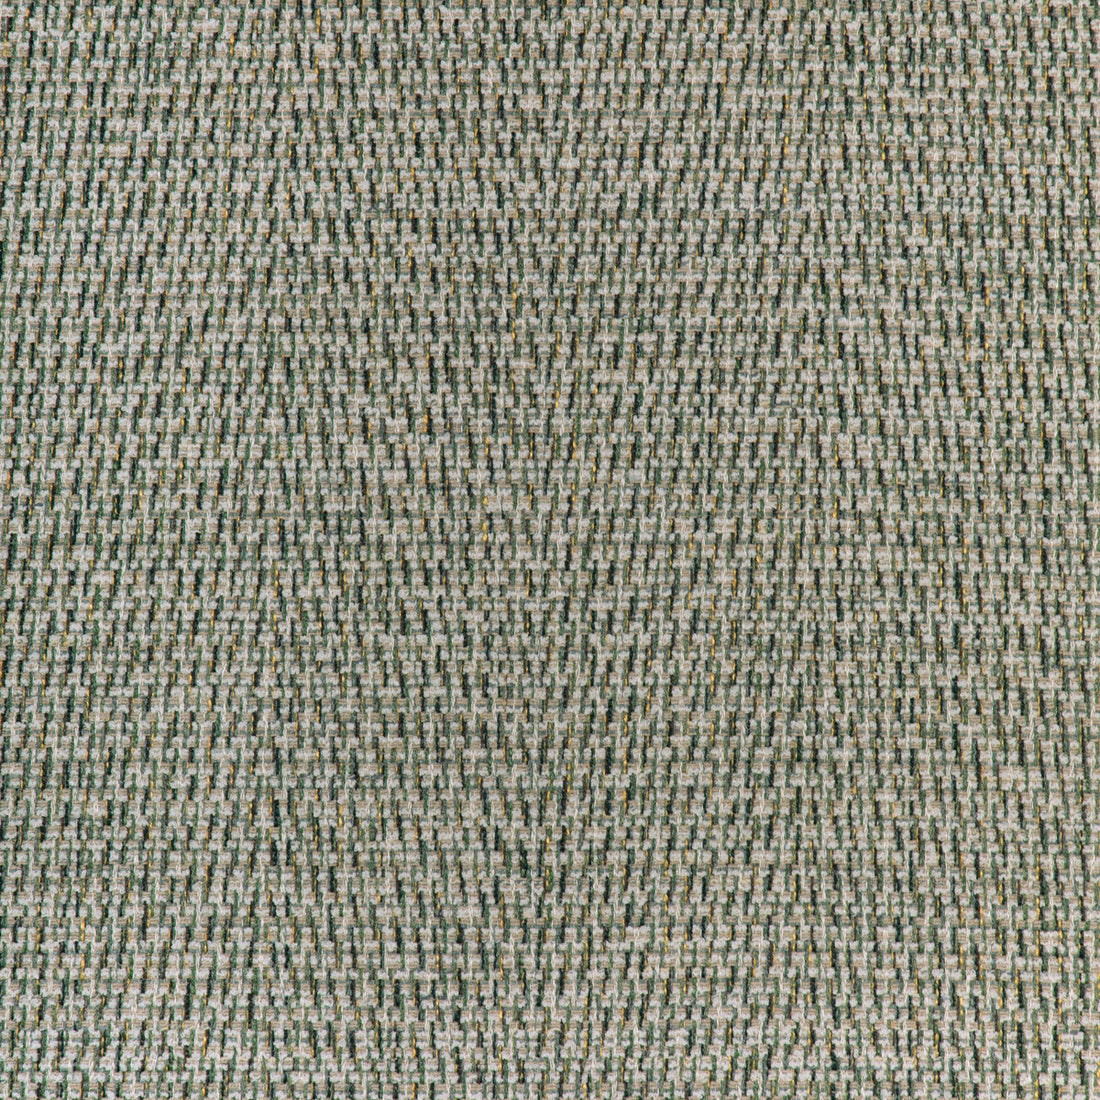 Diderot Texture fabric in green color - pattern 8023132.353.0 - by Brunschwig &amp; Fils in the Arles Weaves collection